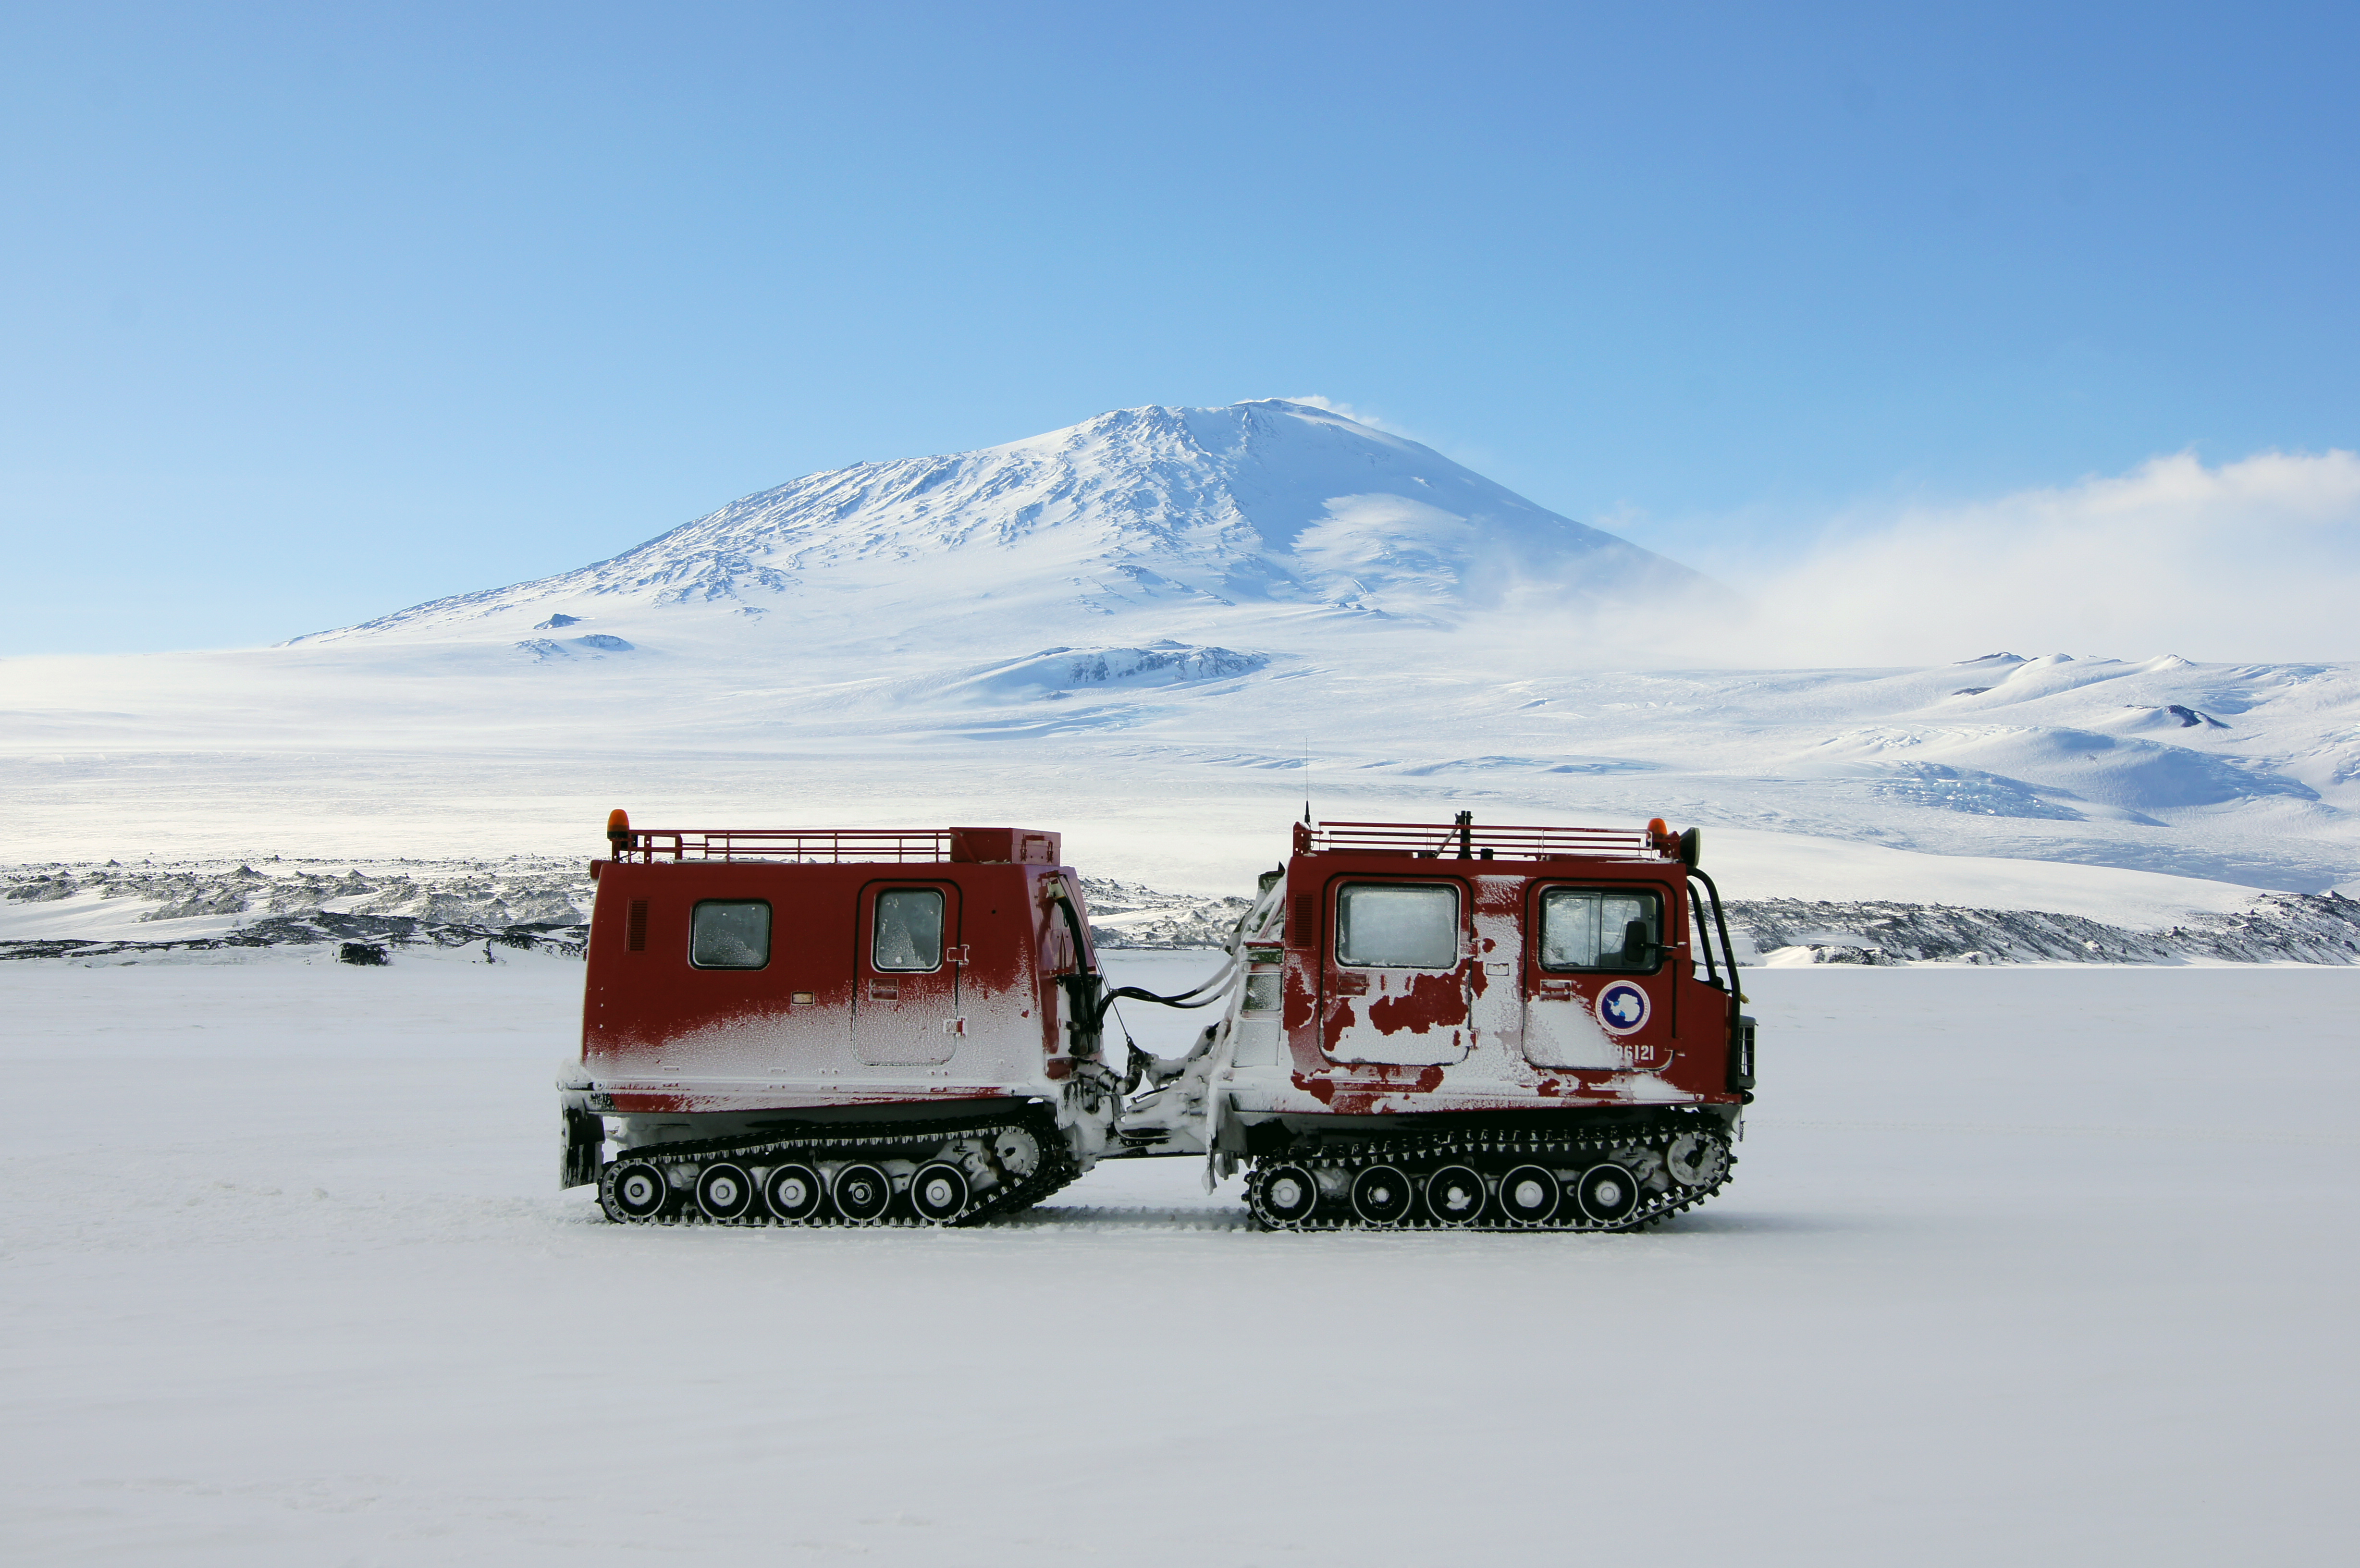 A tracked vehicle on ice sits in front of a mountain.